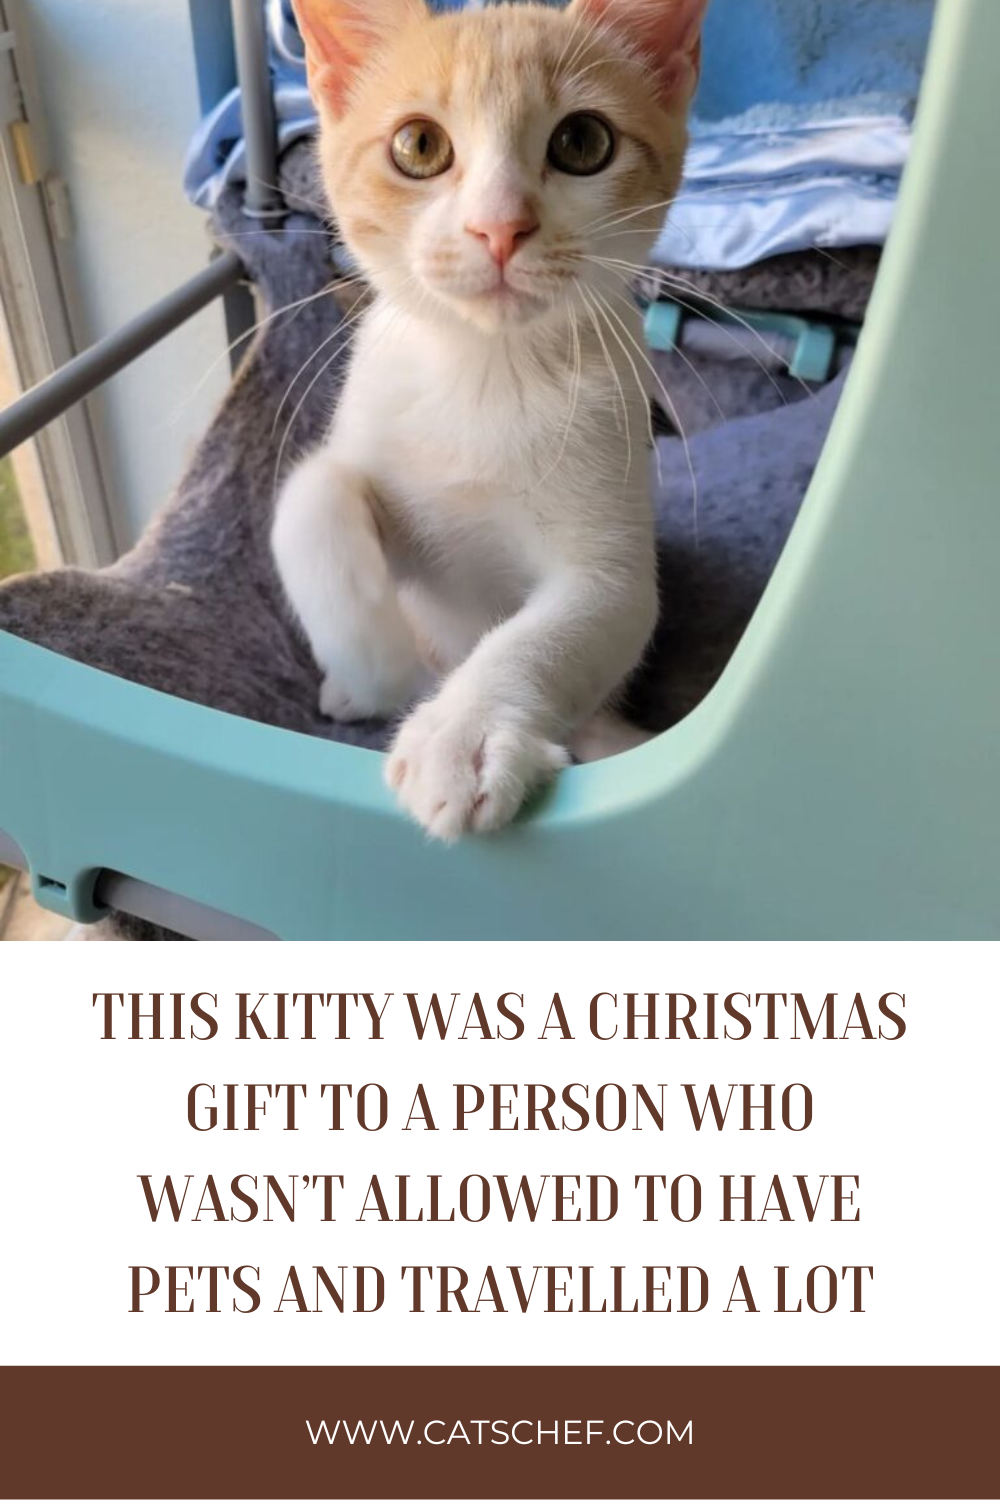 This Kitty Was A Christmas Gift To A Person Who Wasn't Allowed To Have Pets And Travelled A Lot